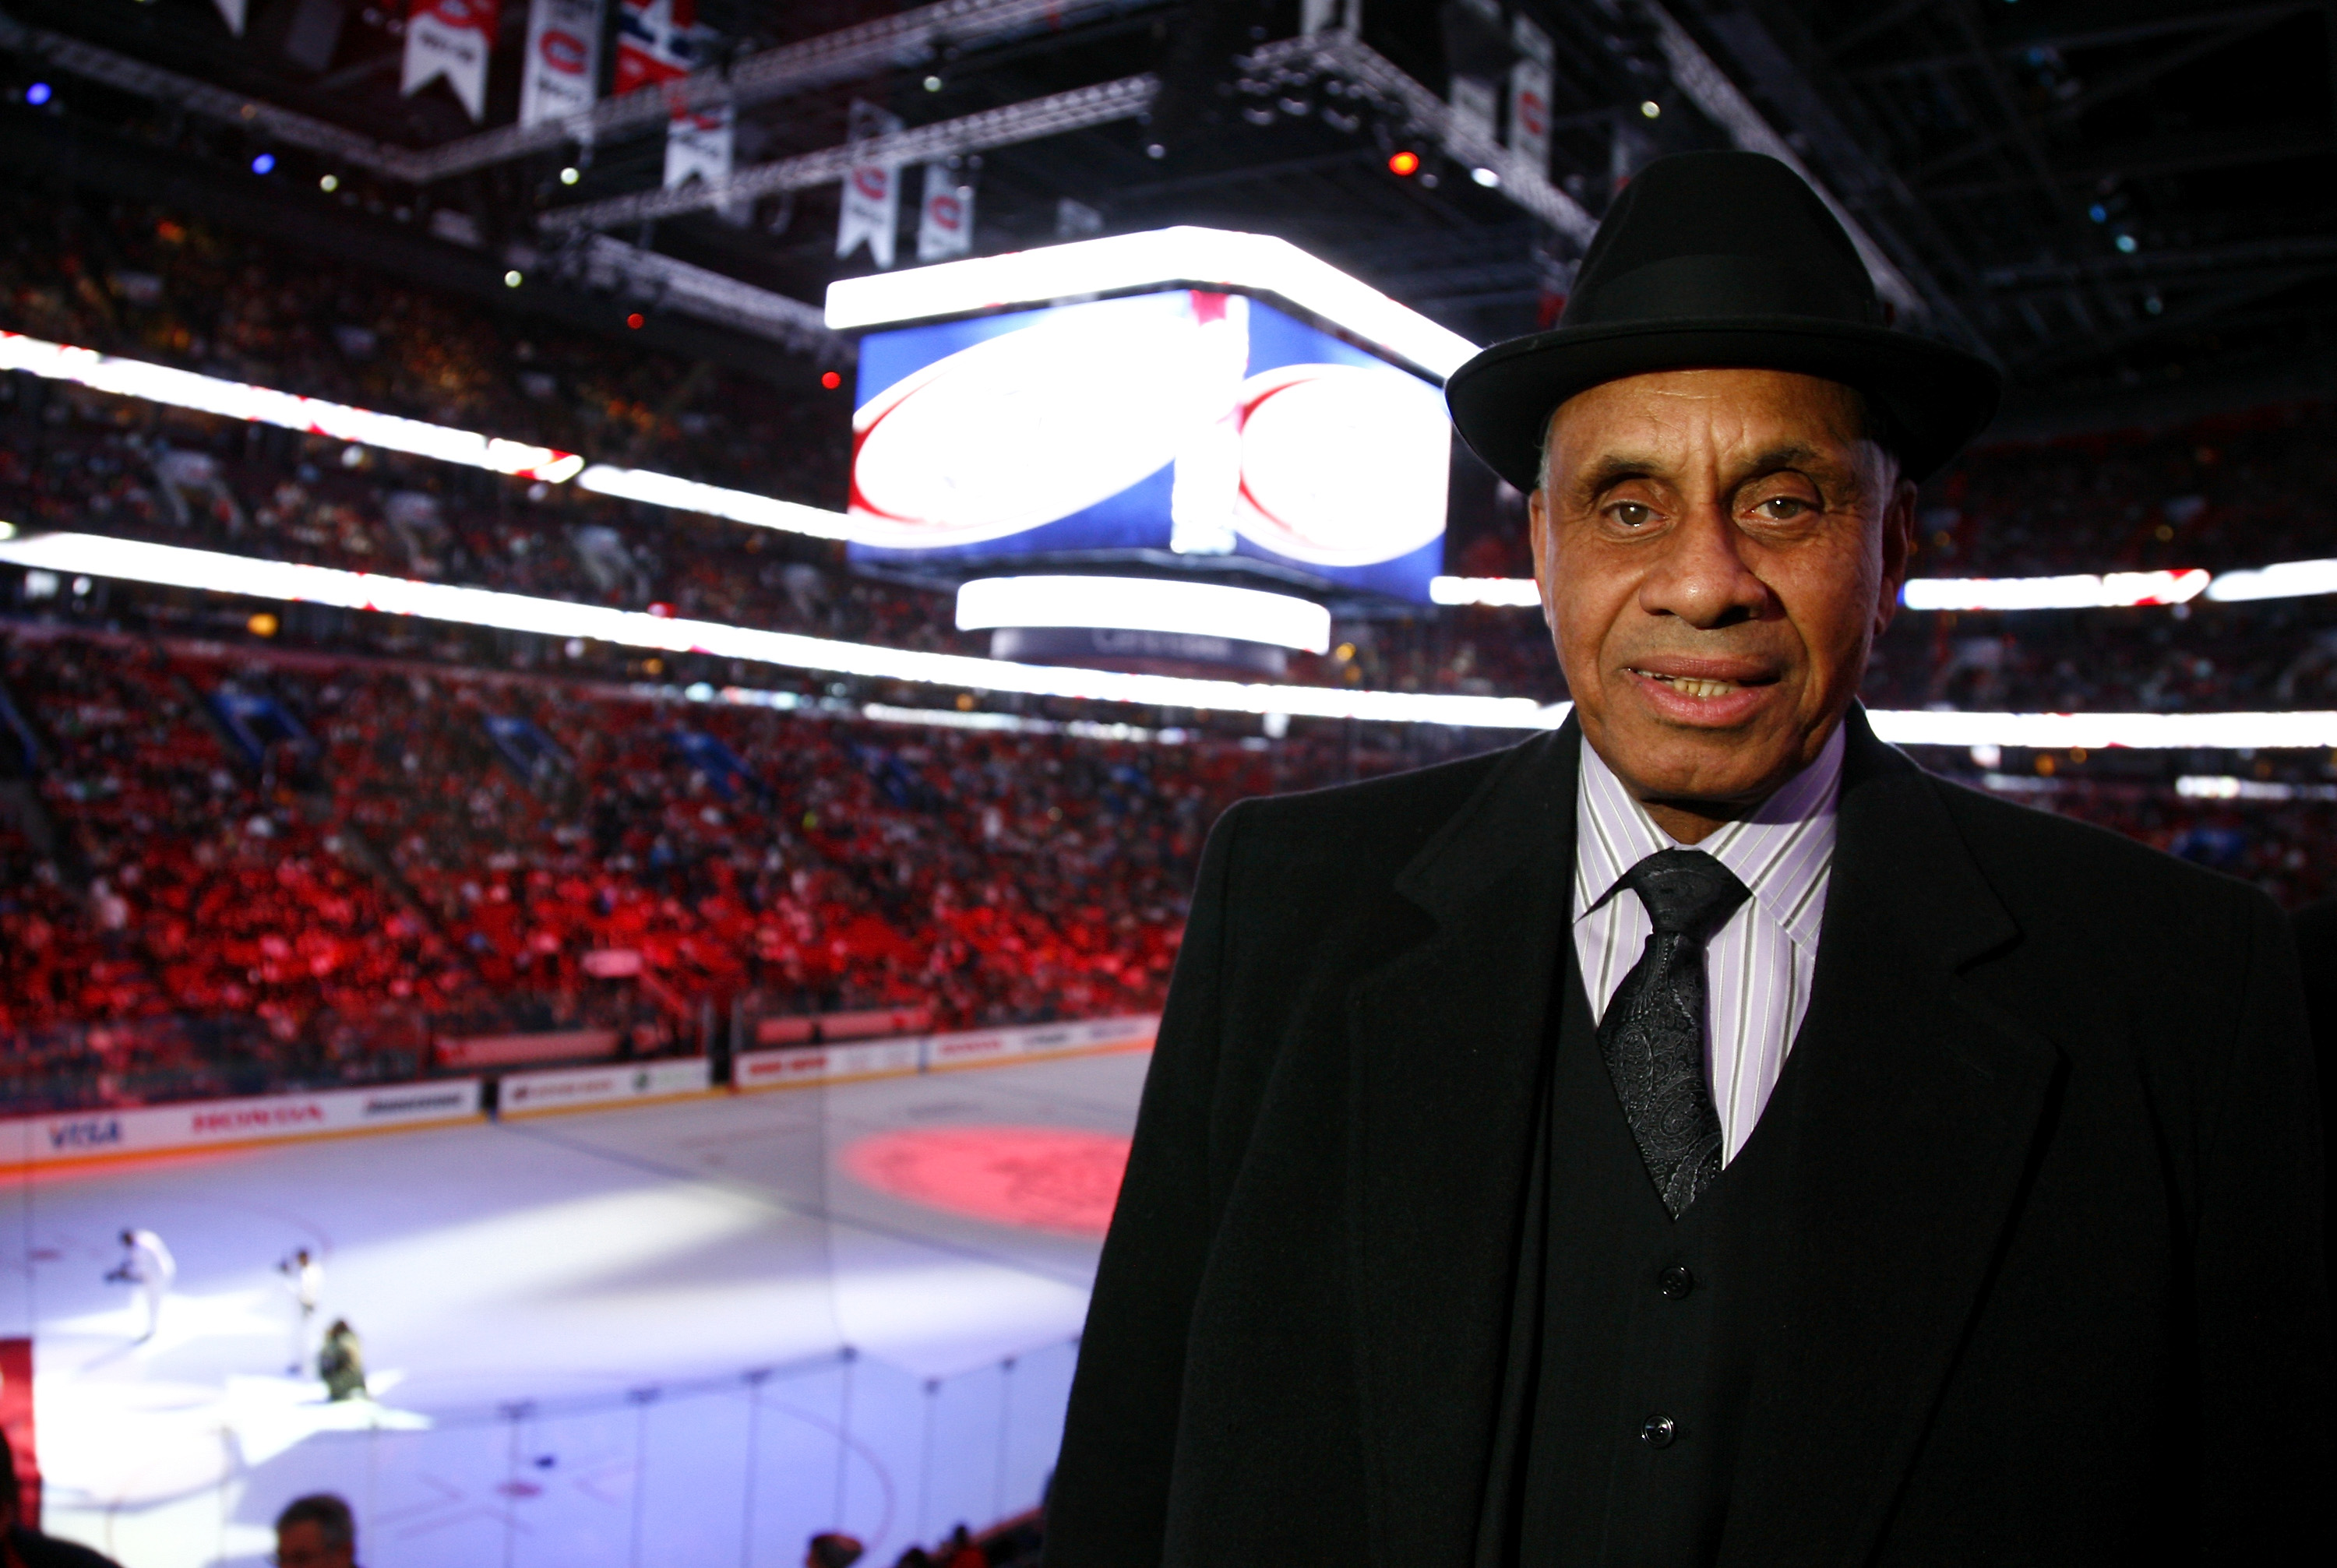 Introducing Willie O'Ree, first black NHL player! #blackexellence  #blackfacts